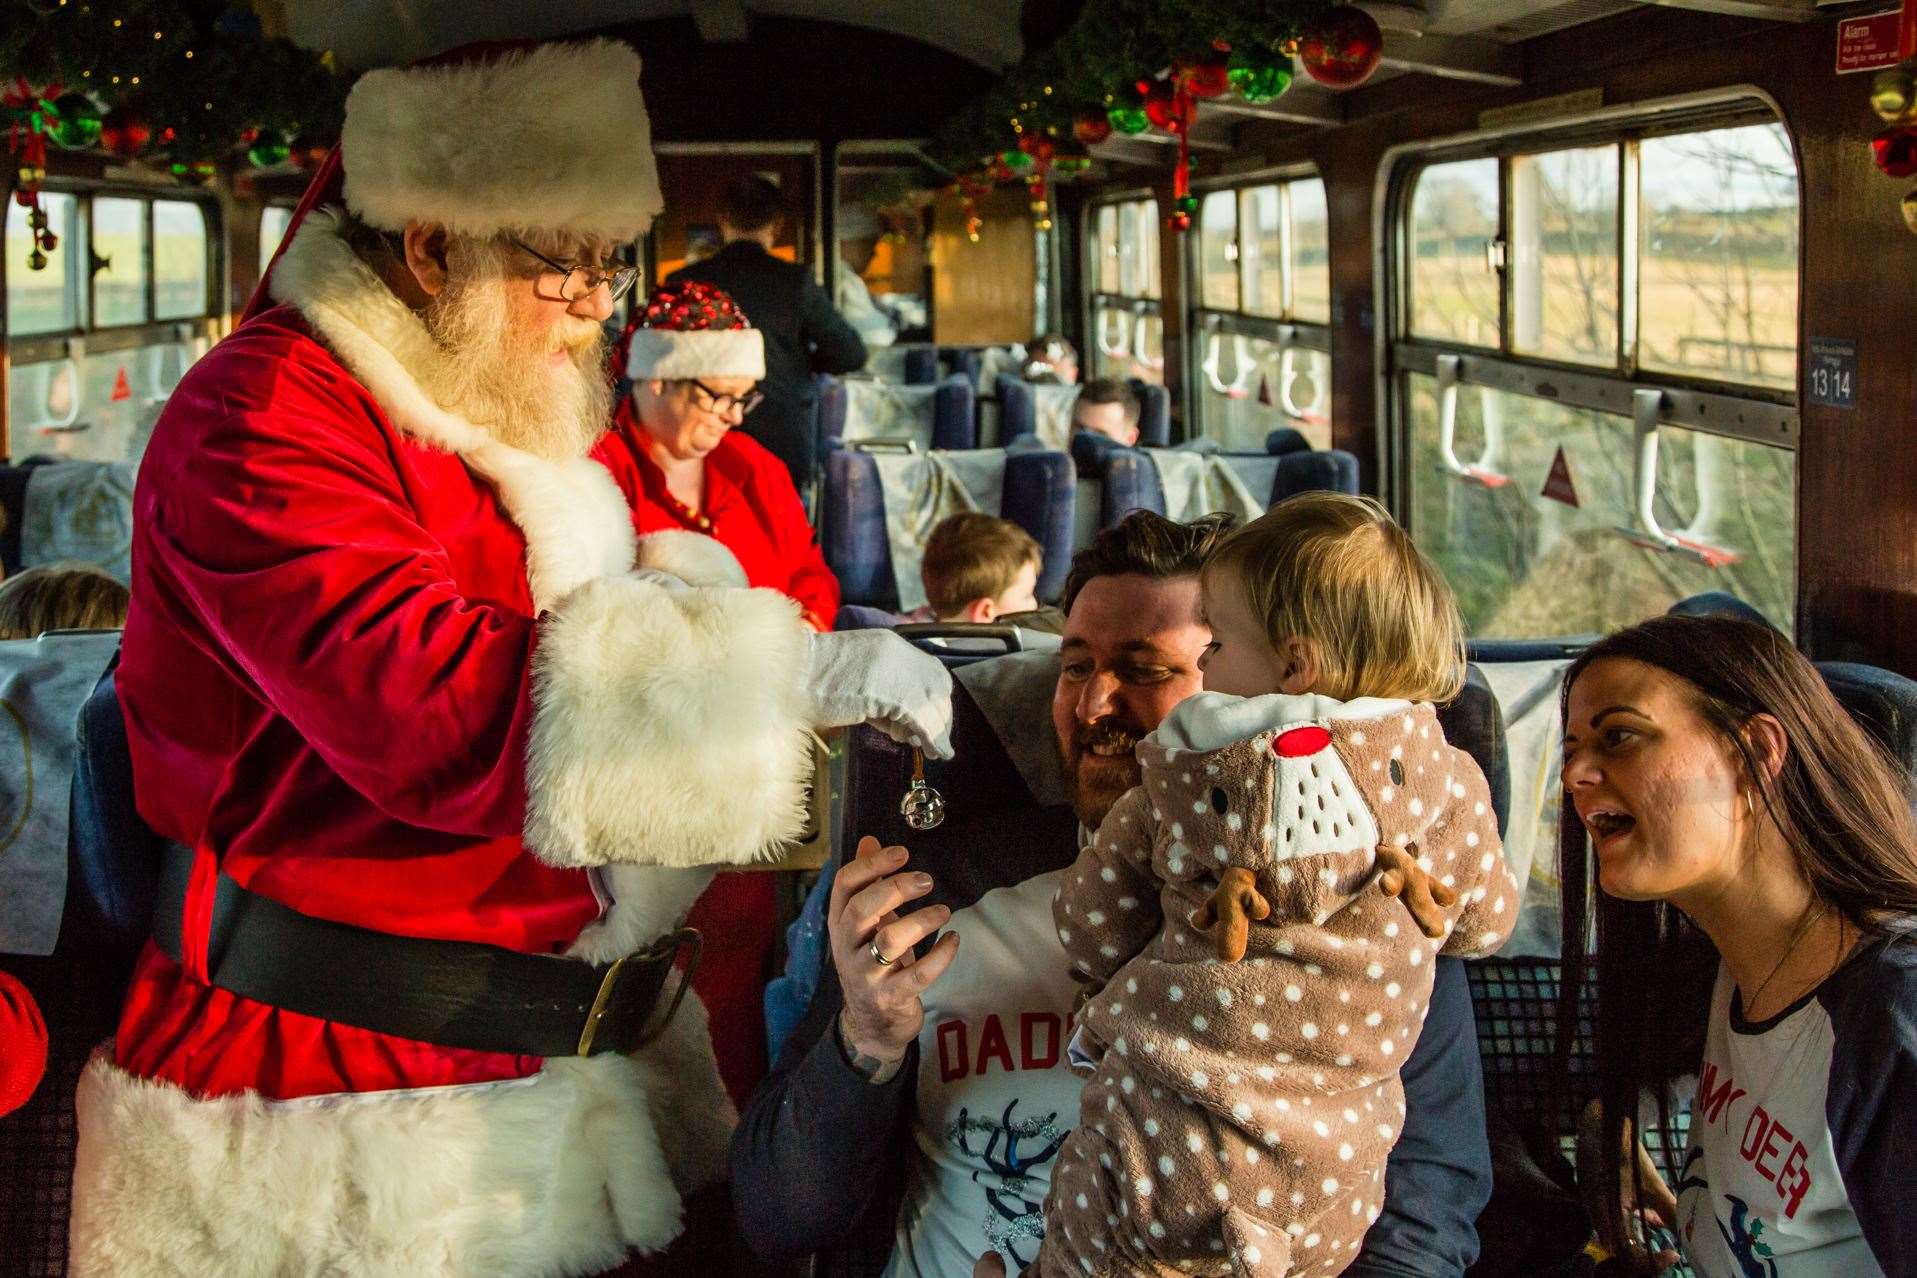 Father Christmas will be climbing aboard The Polar Express